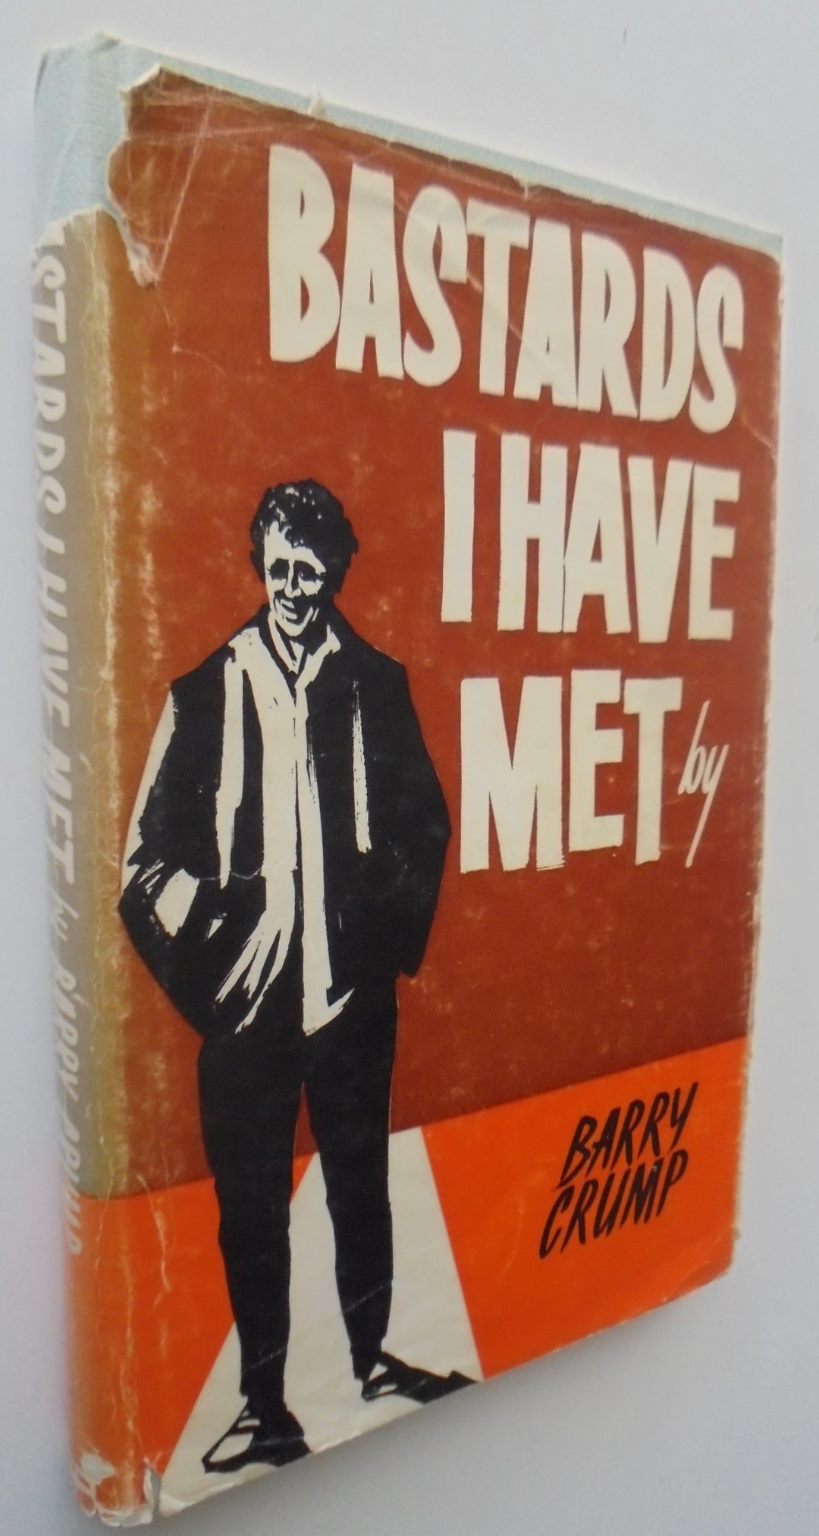 Bastards I Have Met. By Barry Crump 1st Edition Book